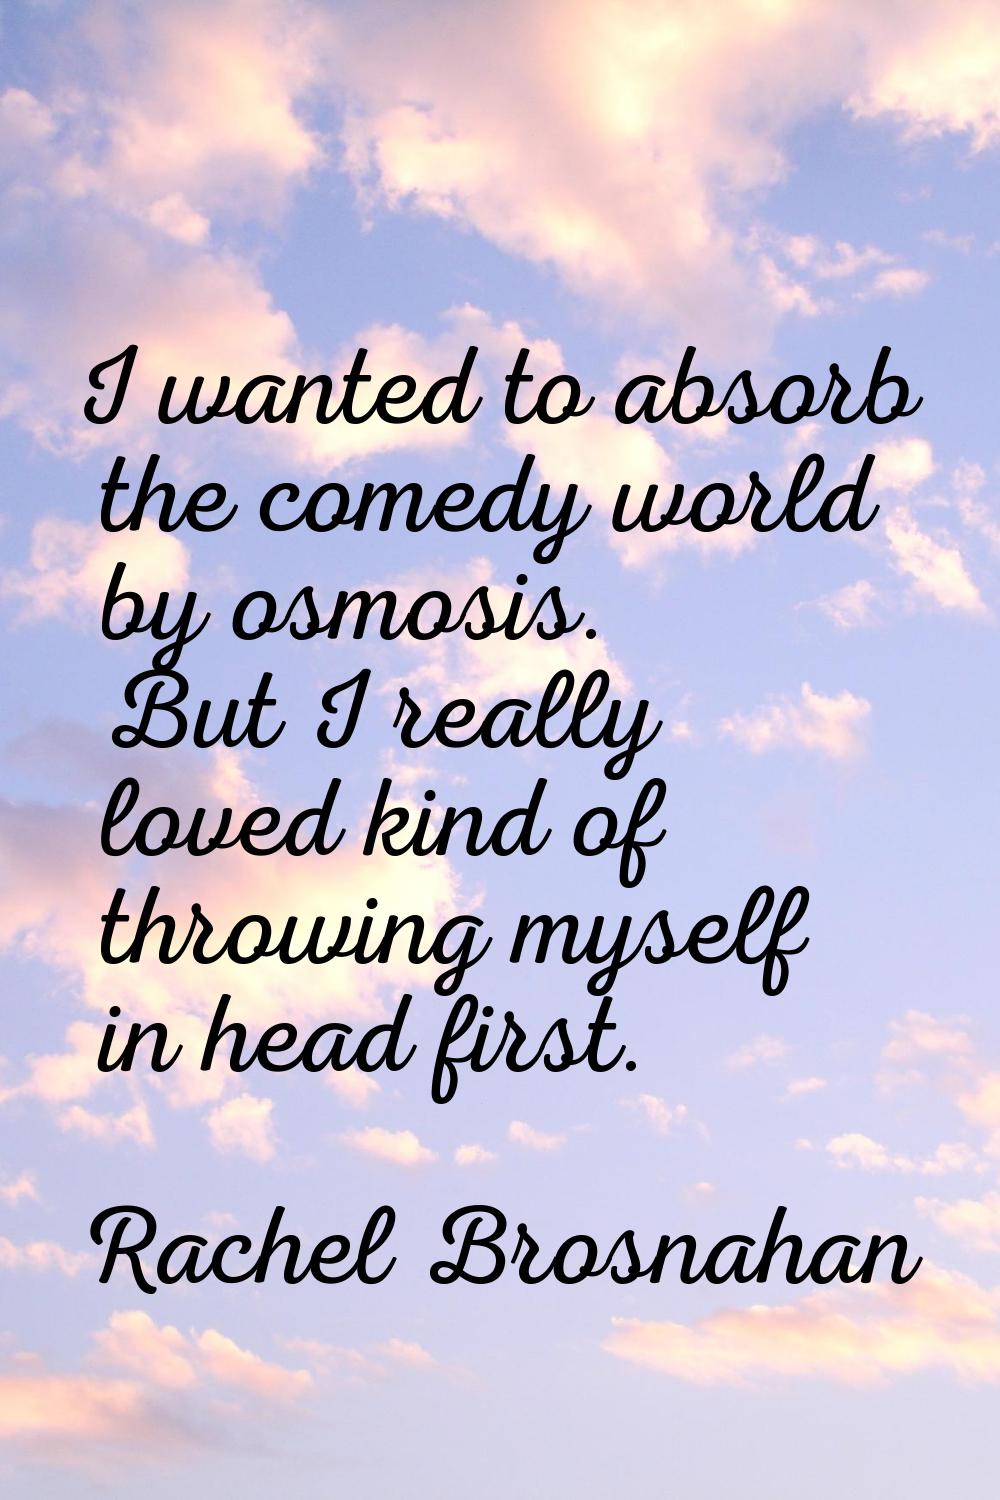 I wanted to absorb the comedy world by osmosis. But I really loved kind of throwing myself in head 